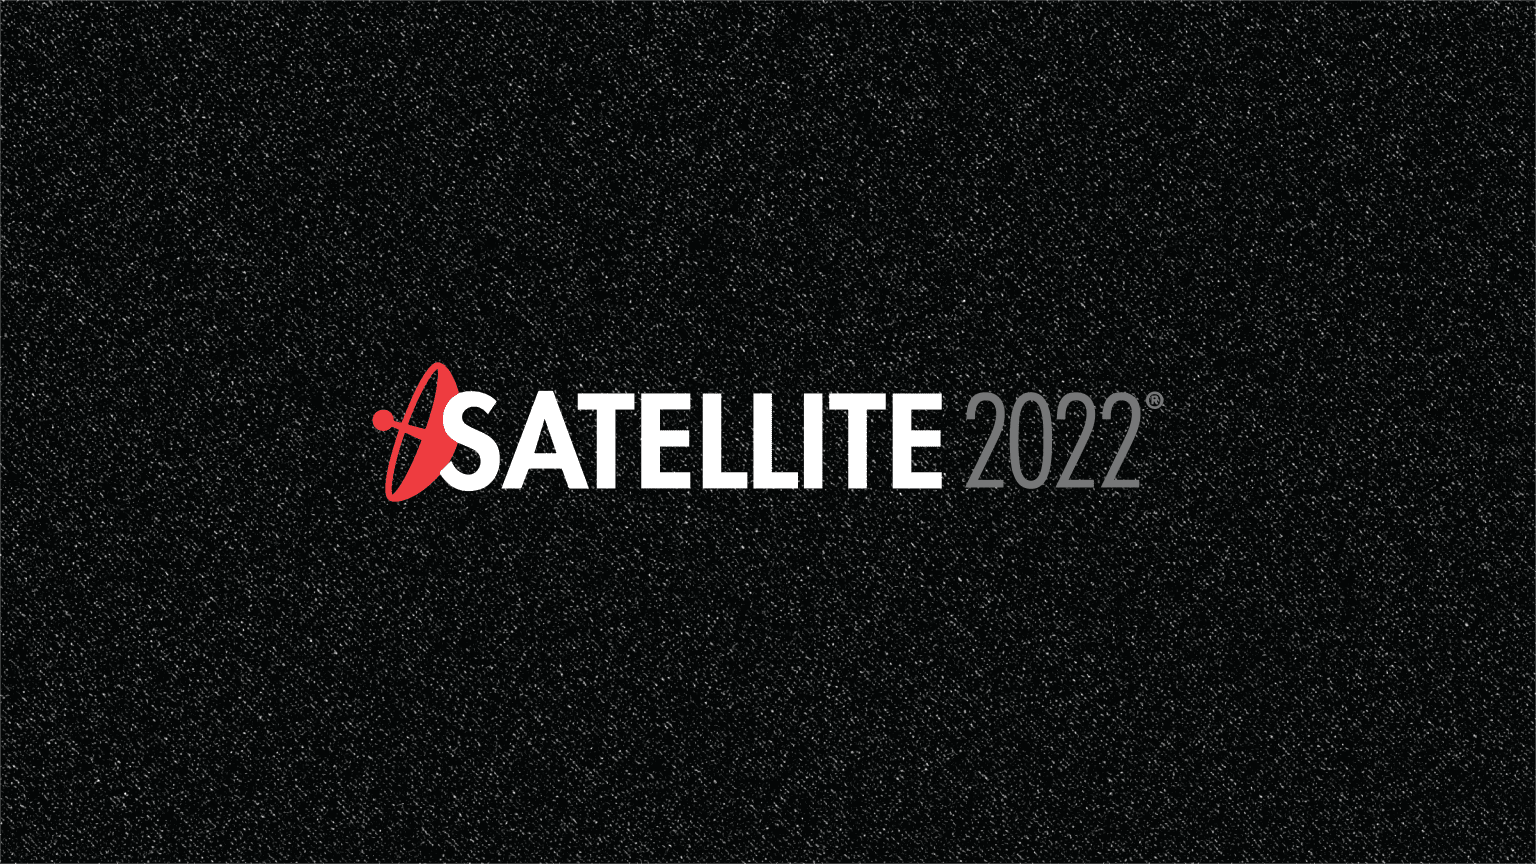 RBSРђЎs Satellite 2022 Conference quick take on cybersecurity: Increasing urgency, few immediate solutions